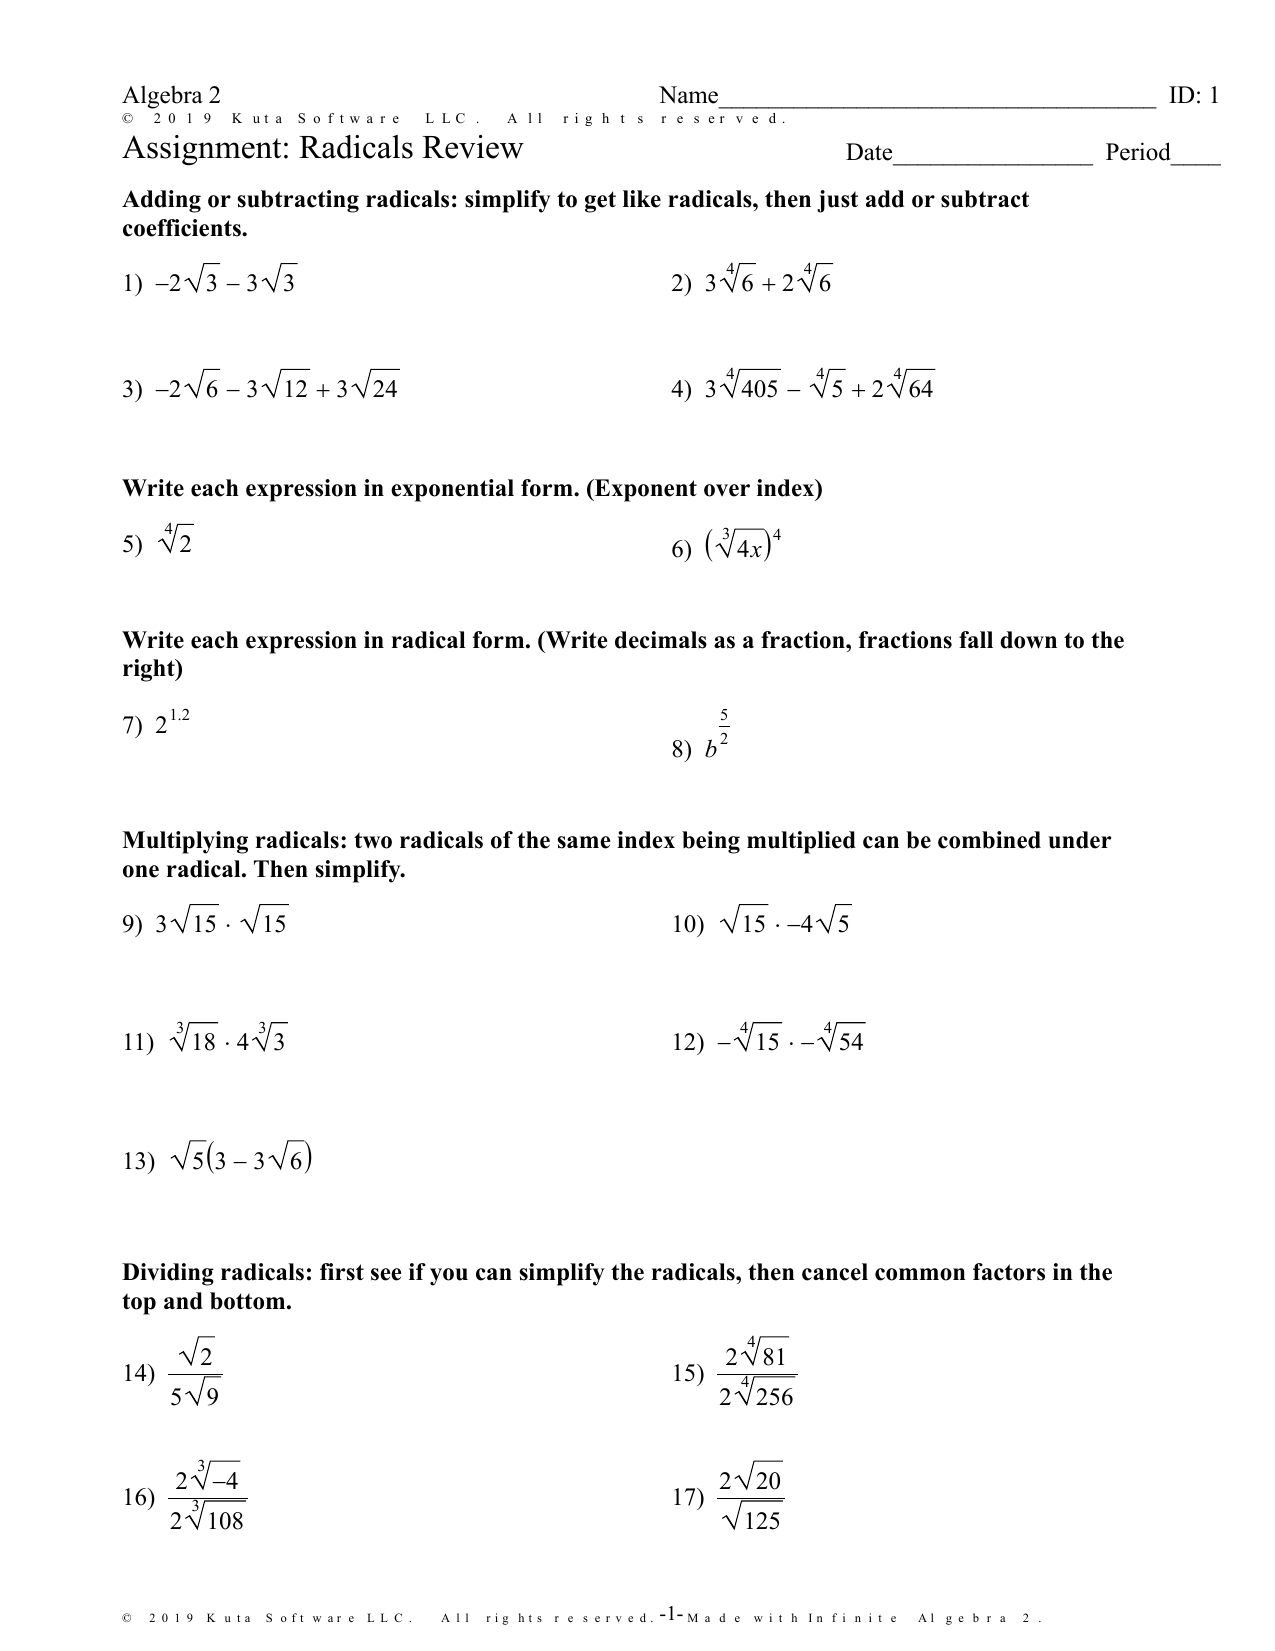 Radicals and Rational Exponents Review In Simplifying Radicals Worksheet With Answers